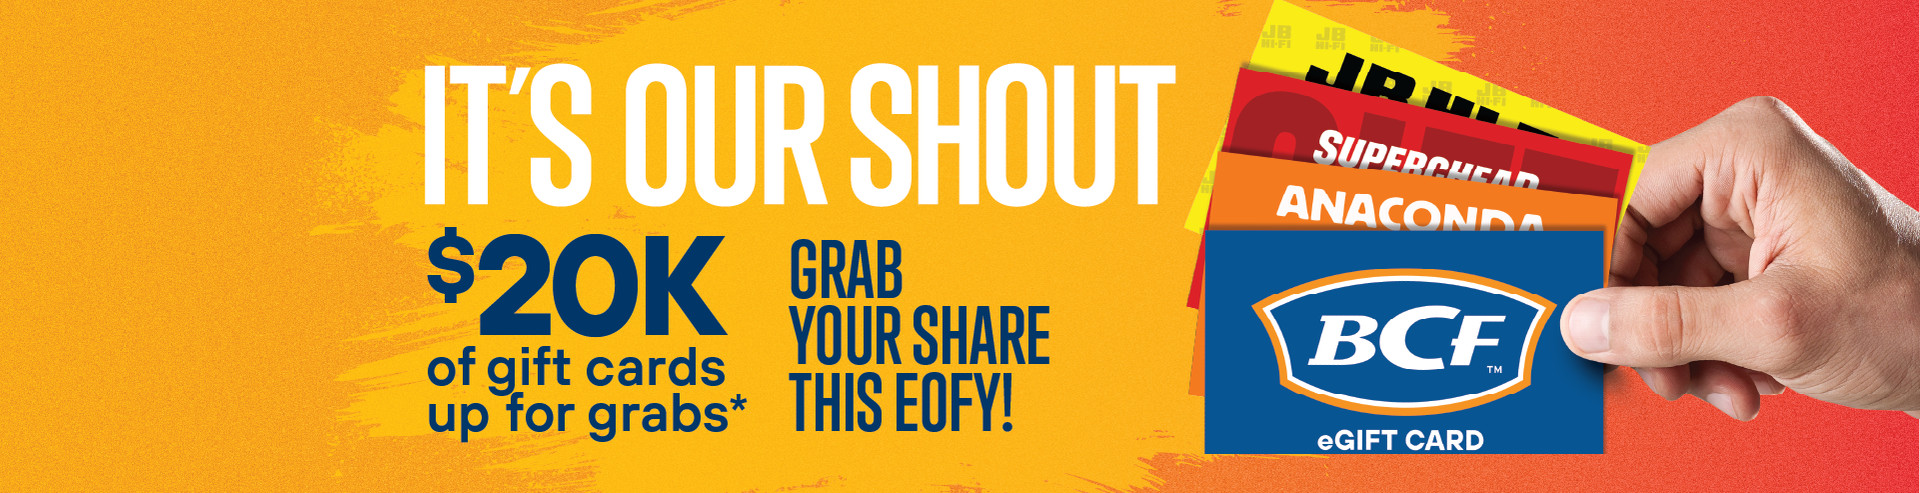 EOFY ITS OUR SHOUT web header 1920x492.jpg